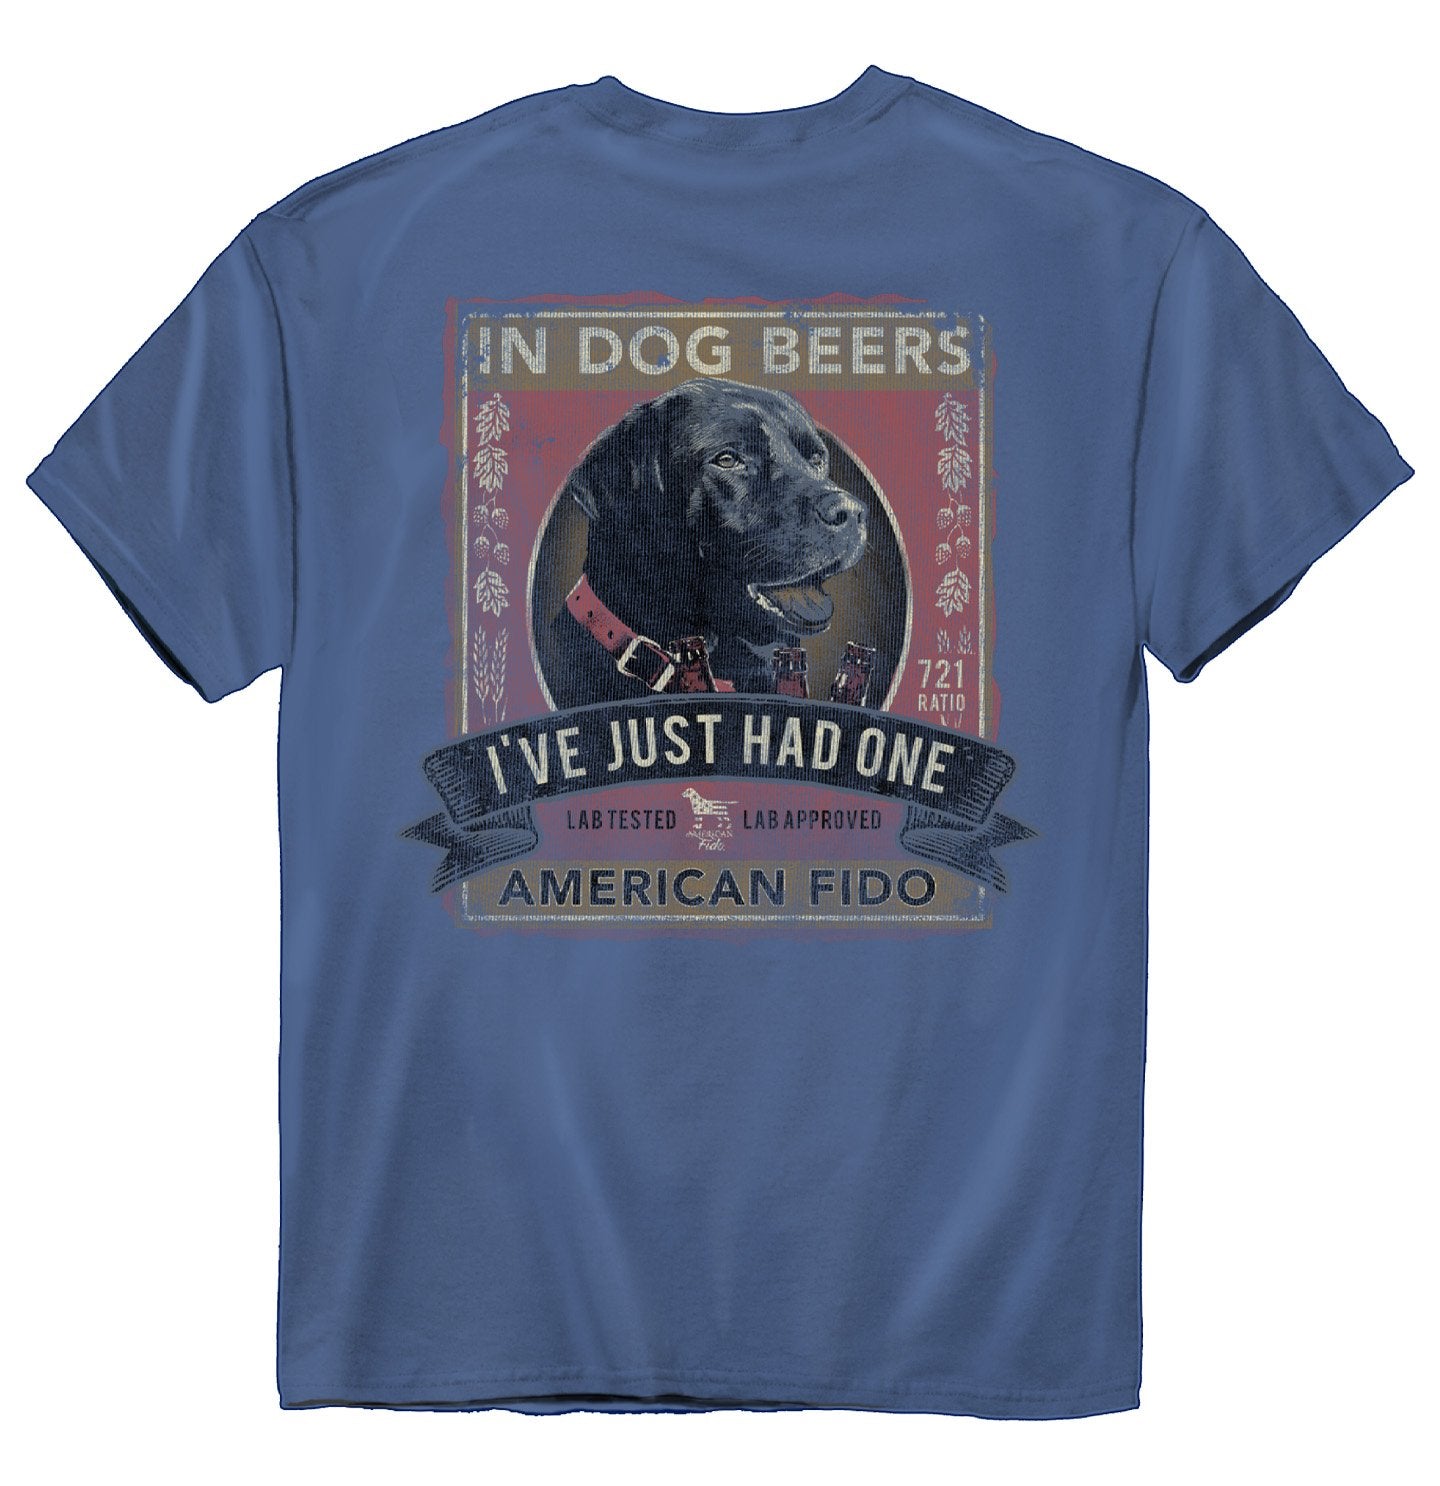 Dog Beers - Adult Unisex T-Shirt